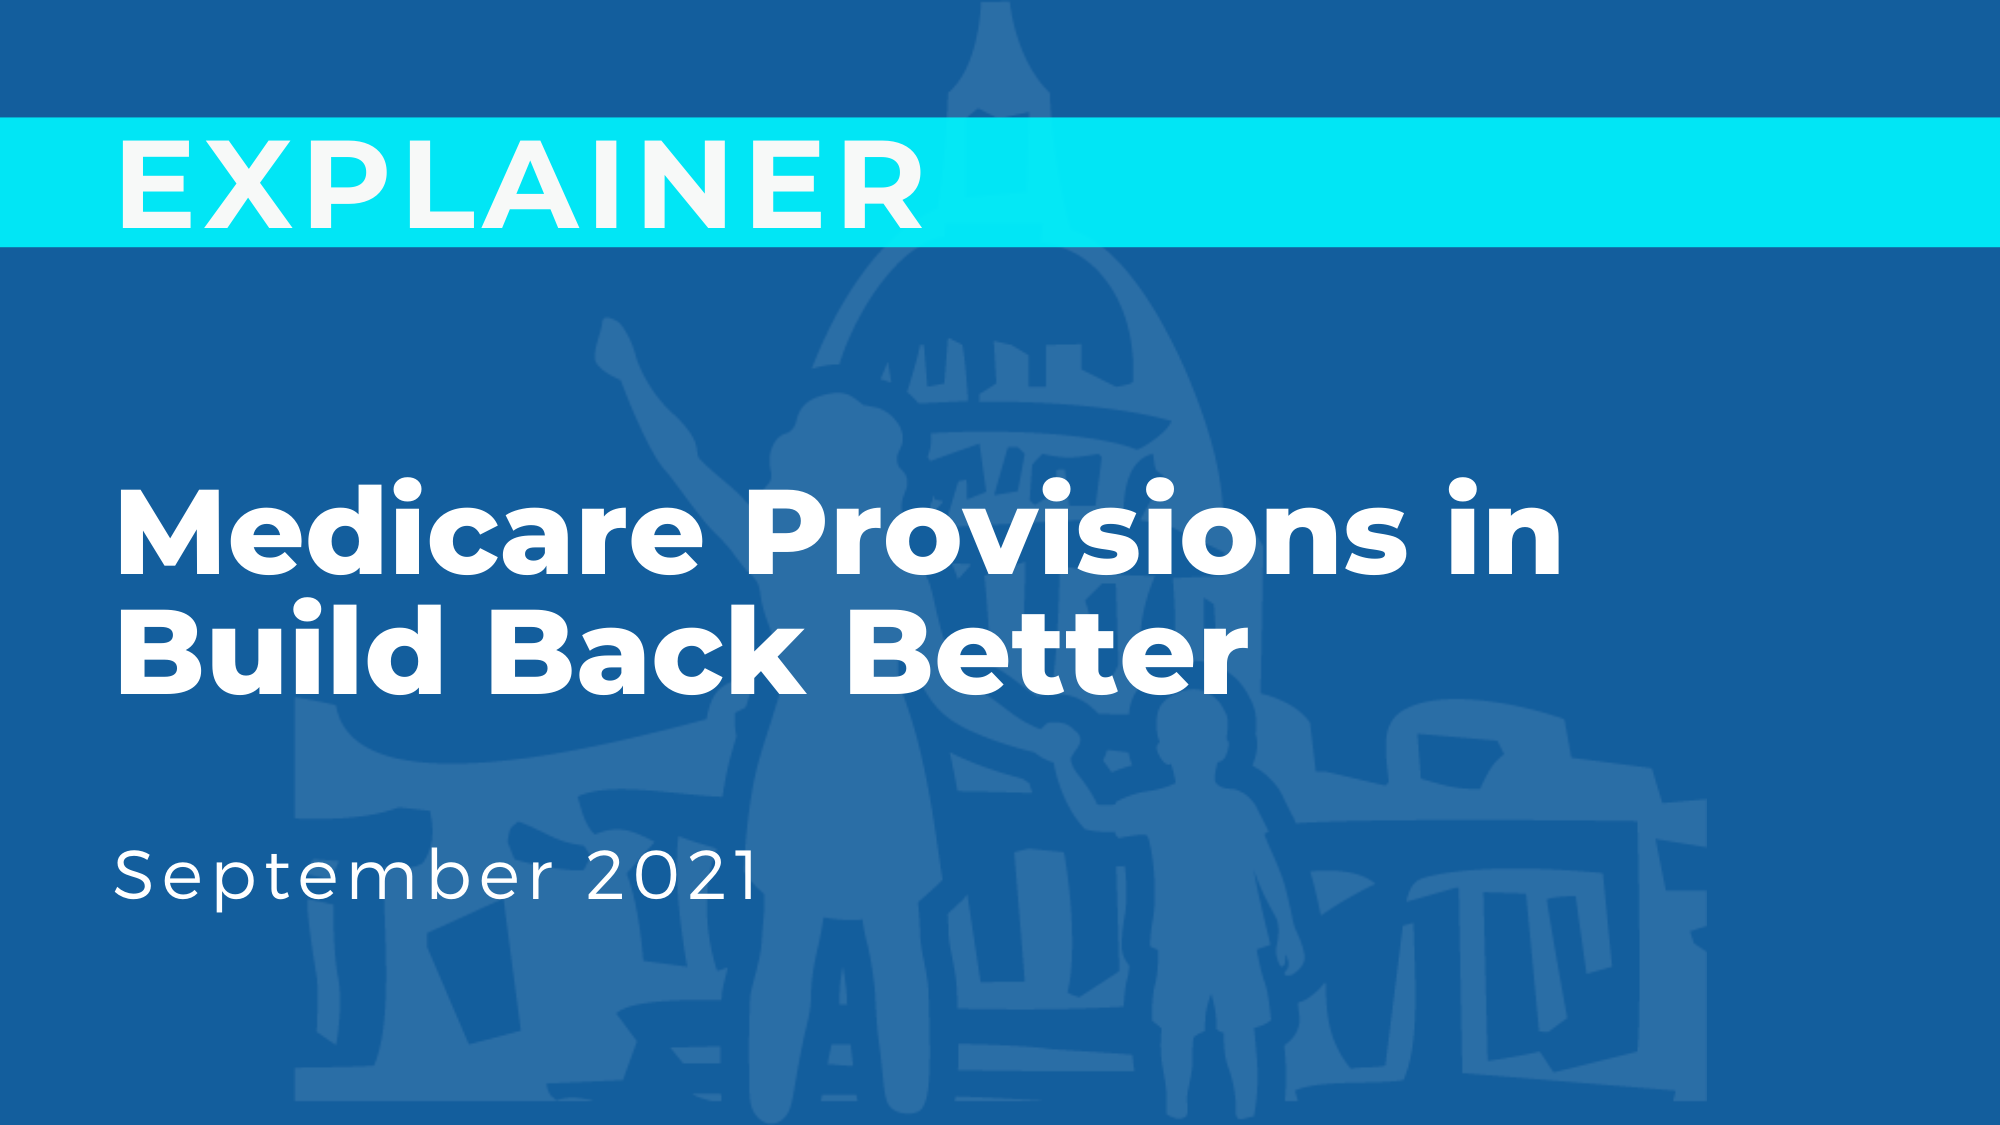 Medicare Provisions in Build Back Better